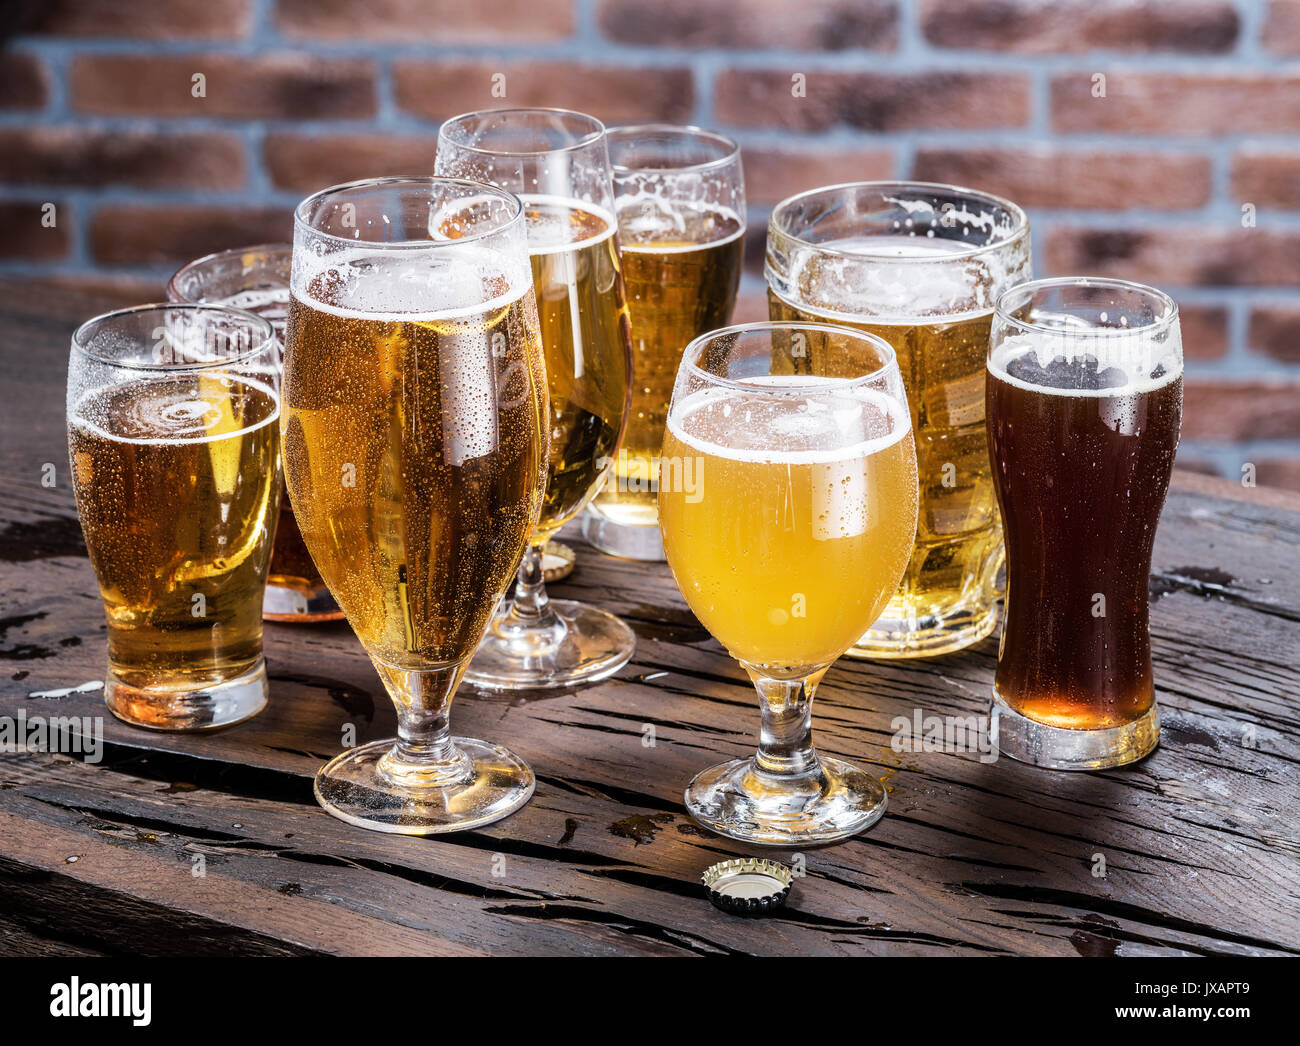 Different glasses of beer on the wooden table. Stock Photo